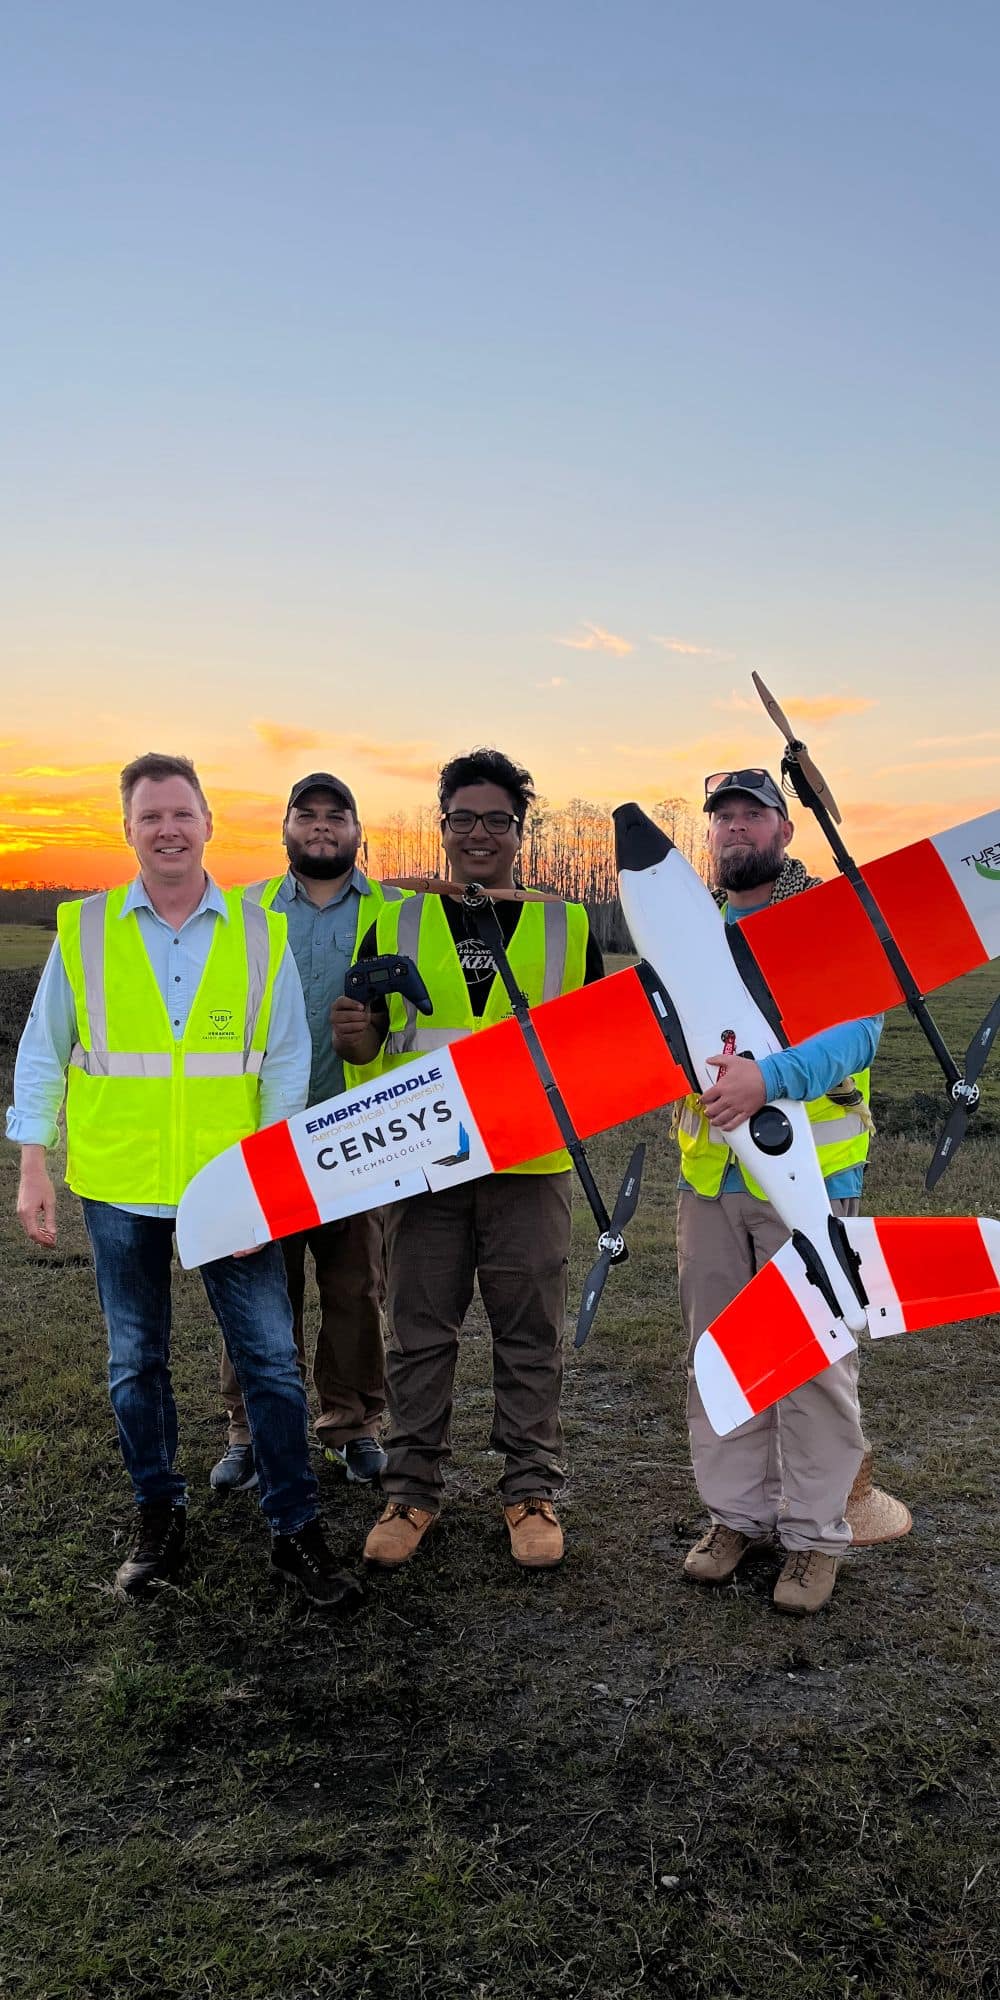 UAS student Jose Cabrera ('22, '24) standing beside his peers and colleagues holding an uncrewed aircraft system used to observe endangered sea turtle behavior. (Photo: Jose Cabrera)